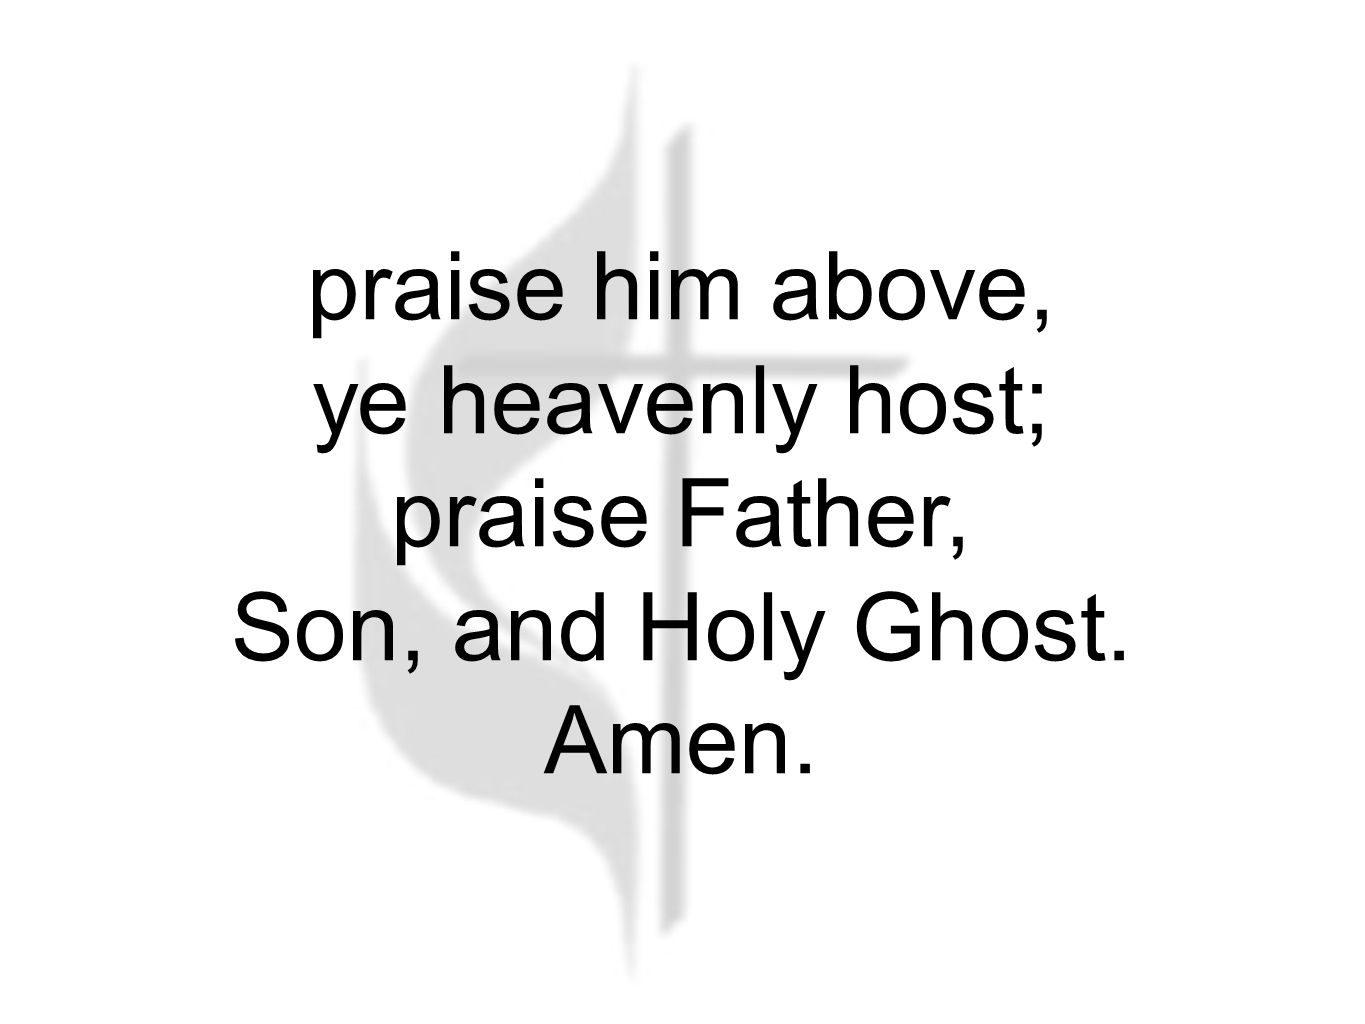 praise him above, ye heavenly host; praise Father, Son, and Holy Ghost. Amen.